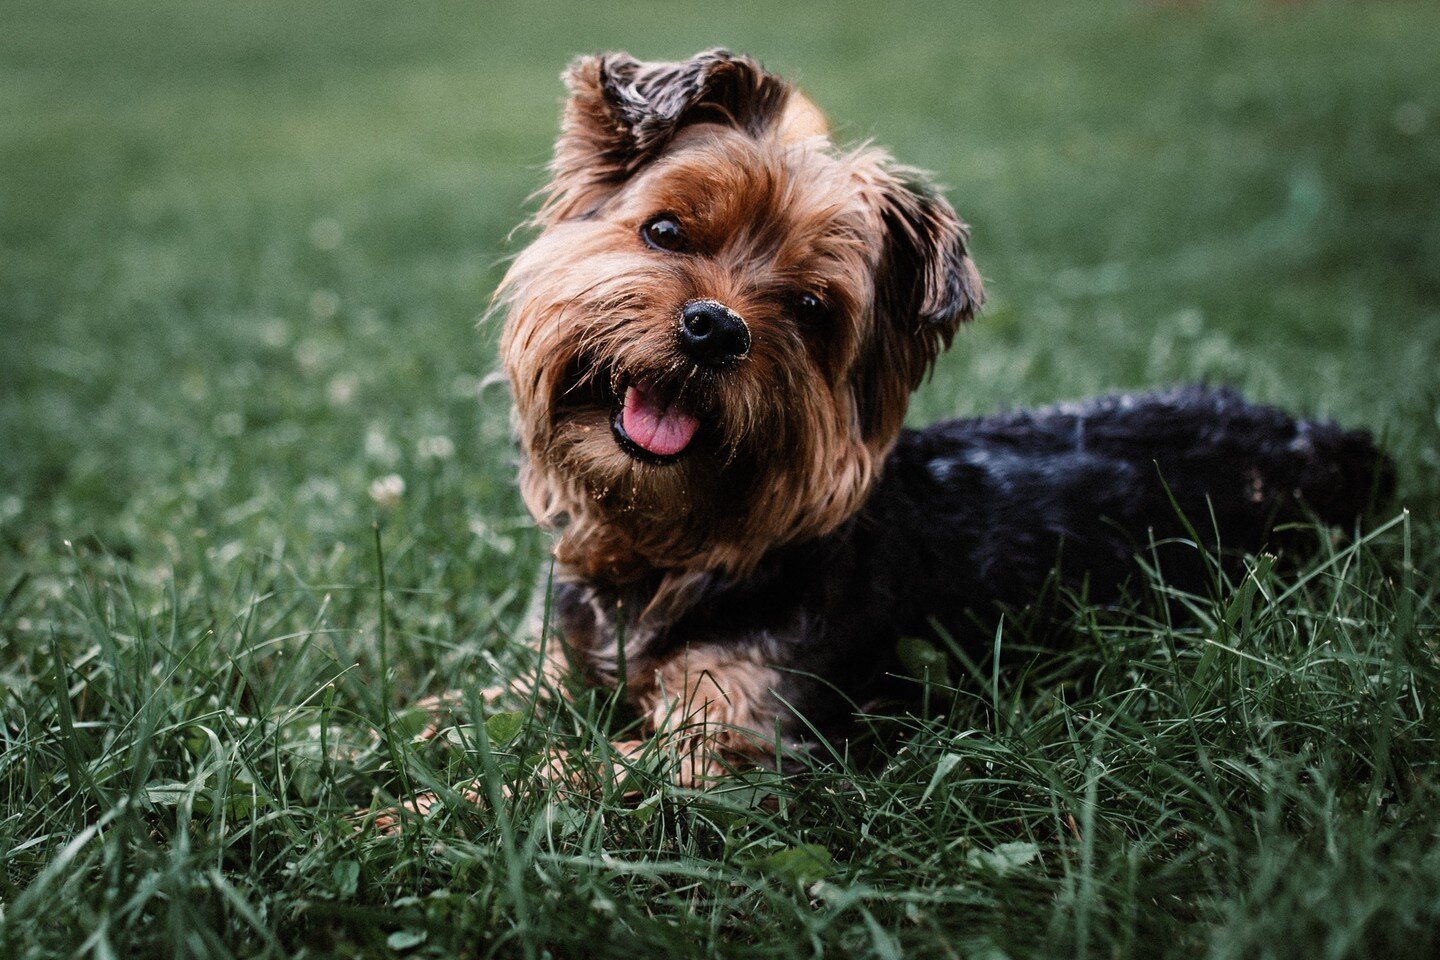 Lola. You were my best girl, my first girl. You will be deeply missed and cherished forever. ❤️

#yorkiesofinstagram 
#dogsofinstagram 
#pet 
#yorkie 
#firstlove 
#unconditionallove 
#lola 
#bestgirl 
#firstbaby 
#furbaby 
#sweetgirl 
#britches 
#lol